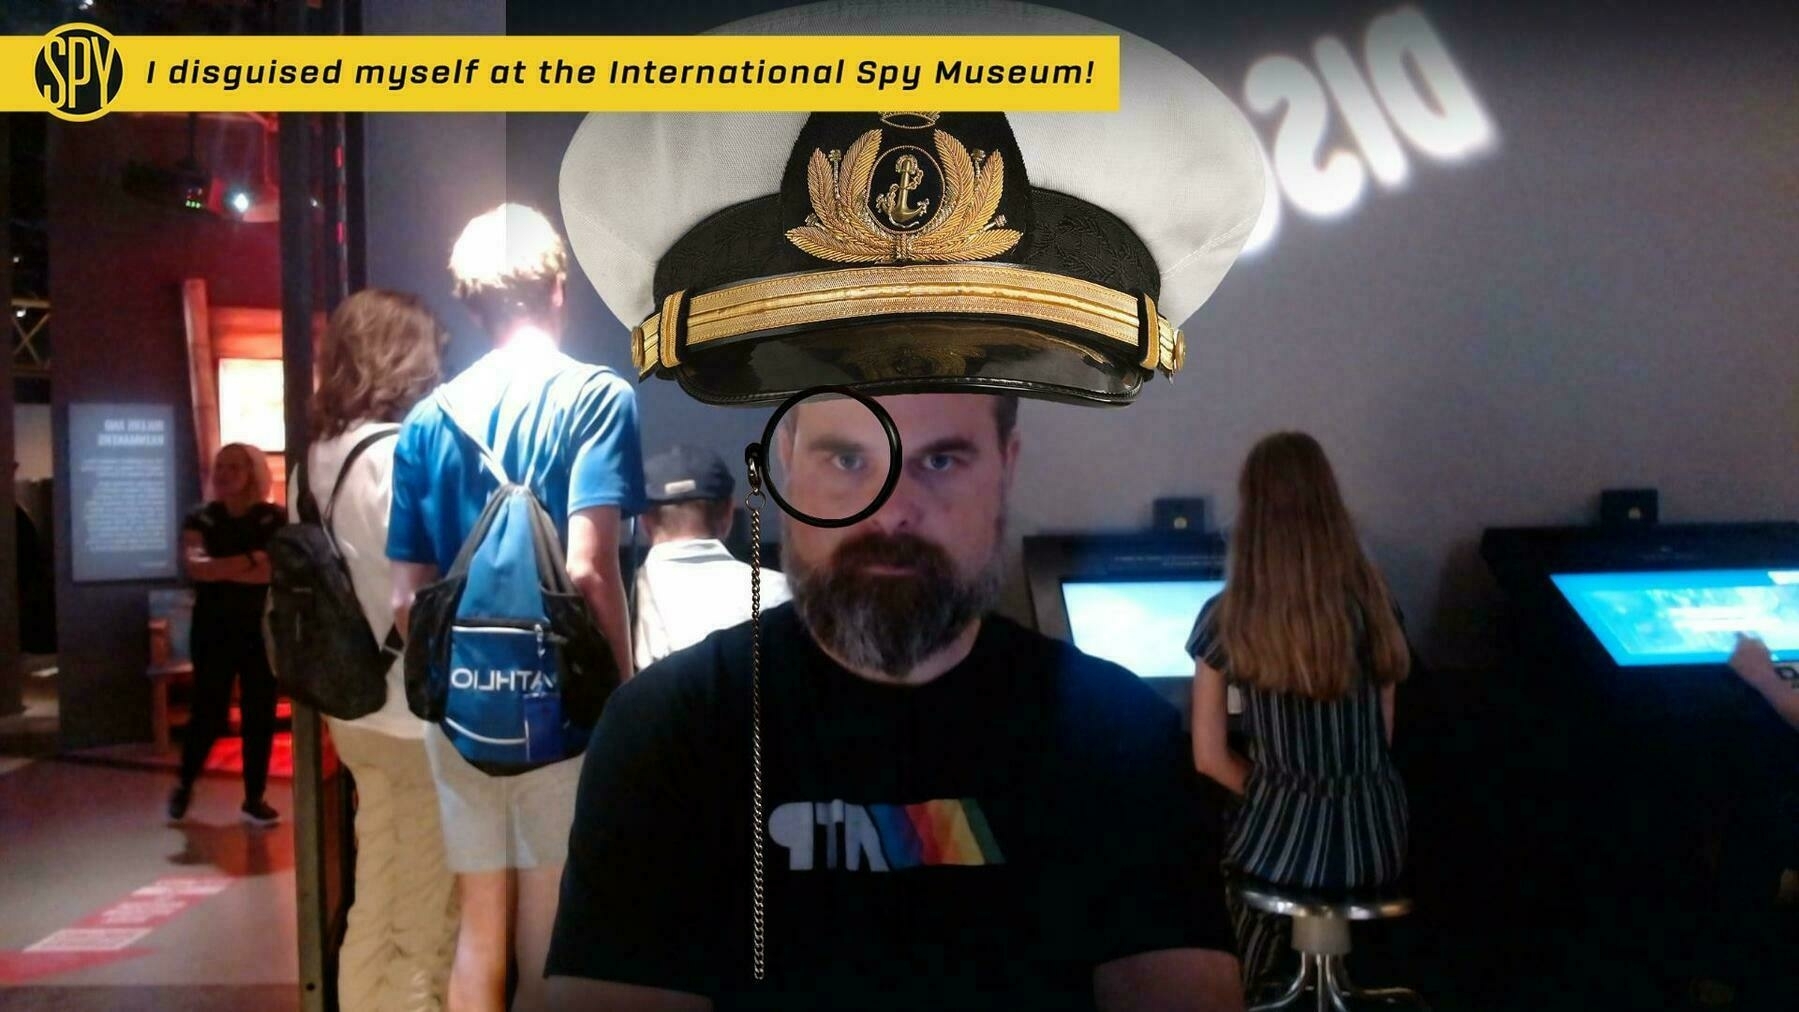 Sam superimposed with a ridiculously large nautical hat and huge monocle.